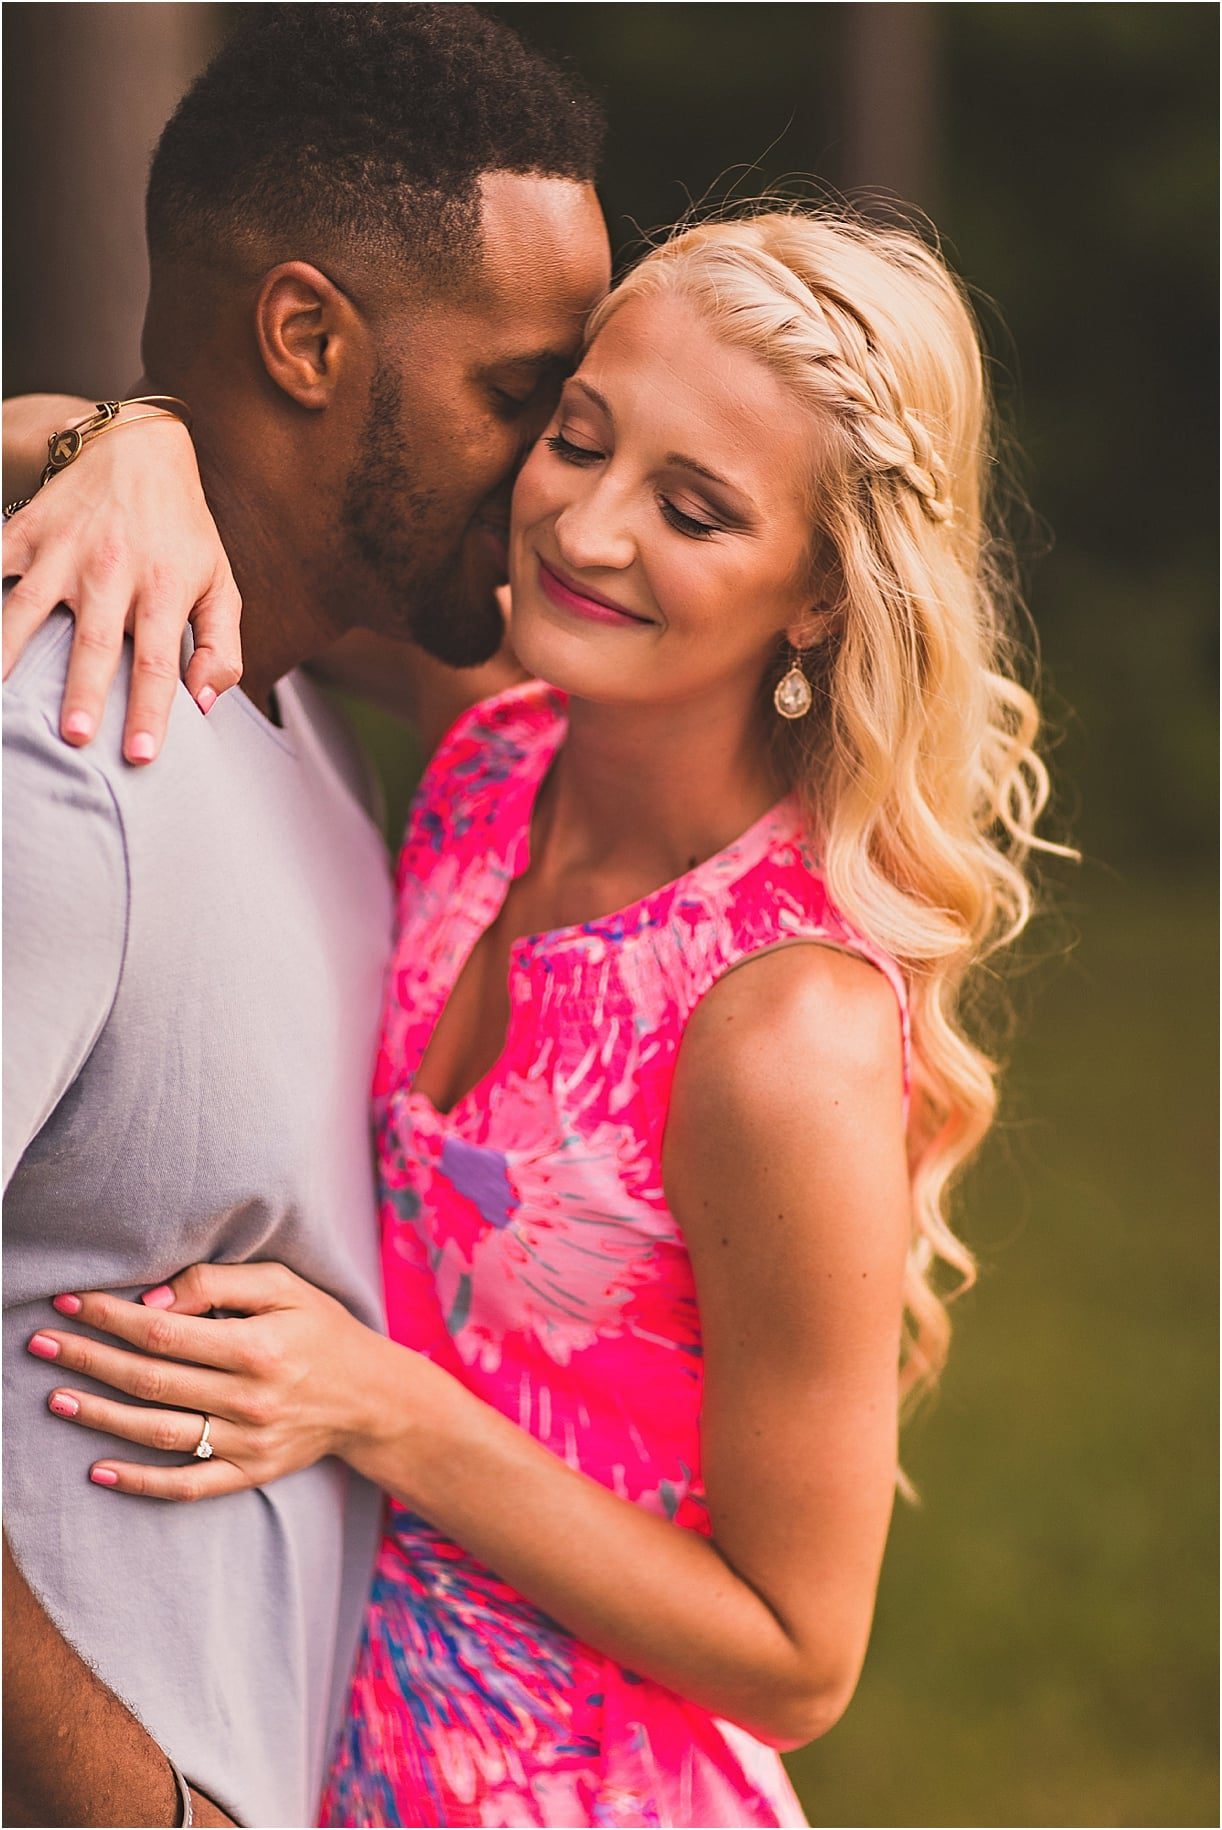 Mountainside Engagement Session | Hill City Bride Virginia Wedding Blog by Megan Vaughan Photography